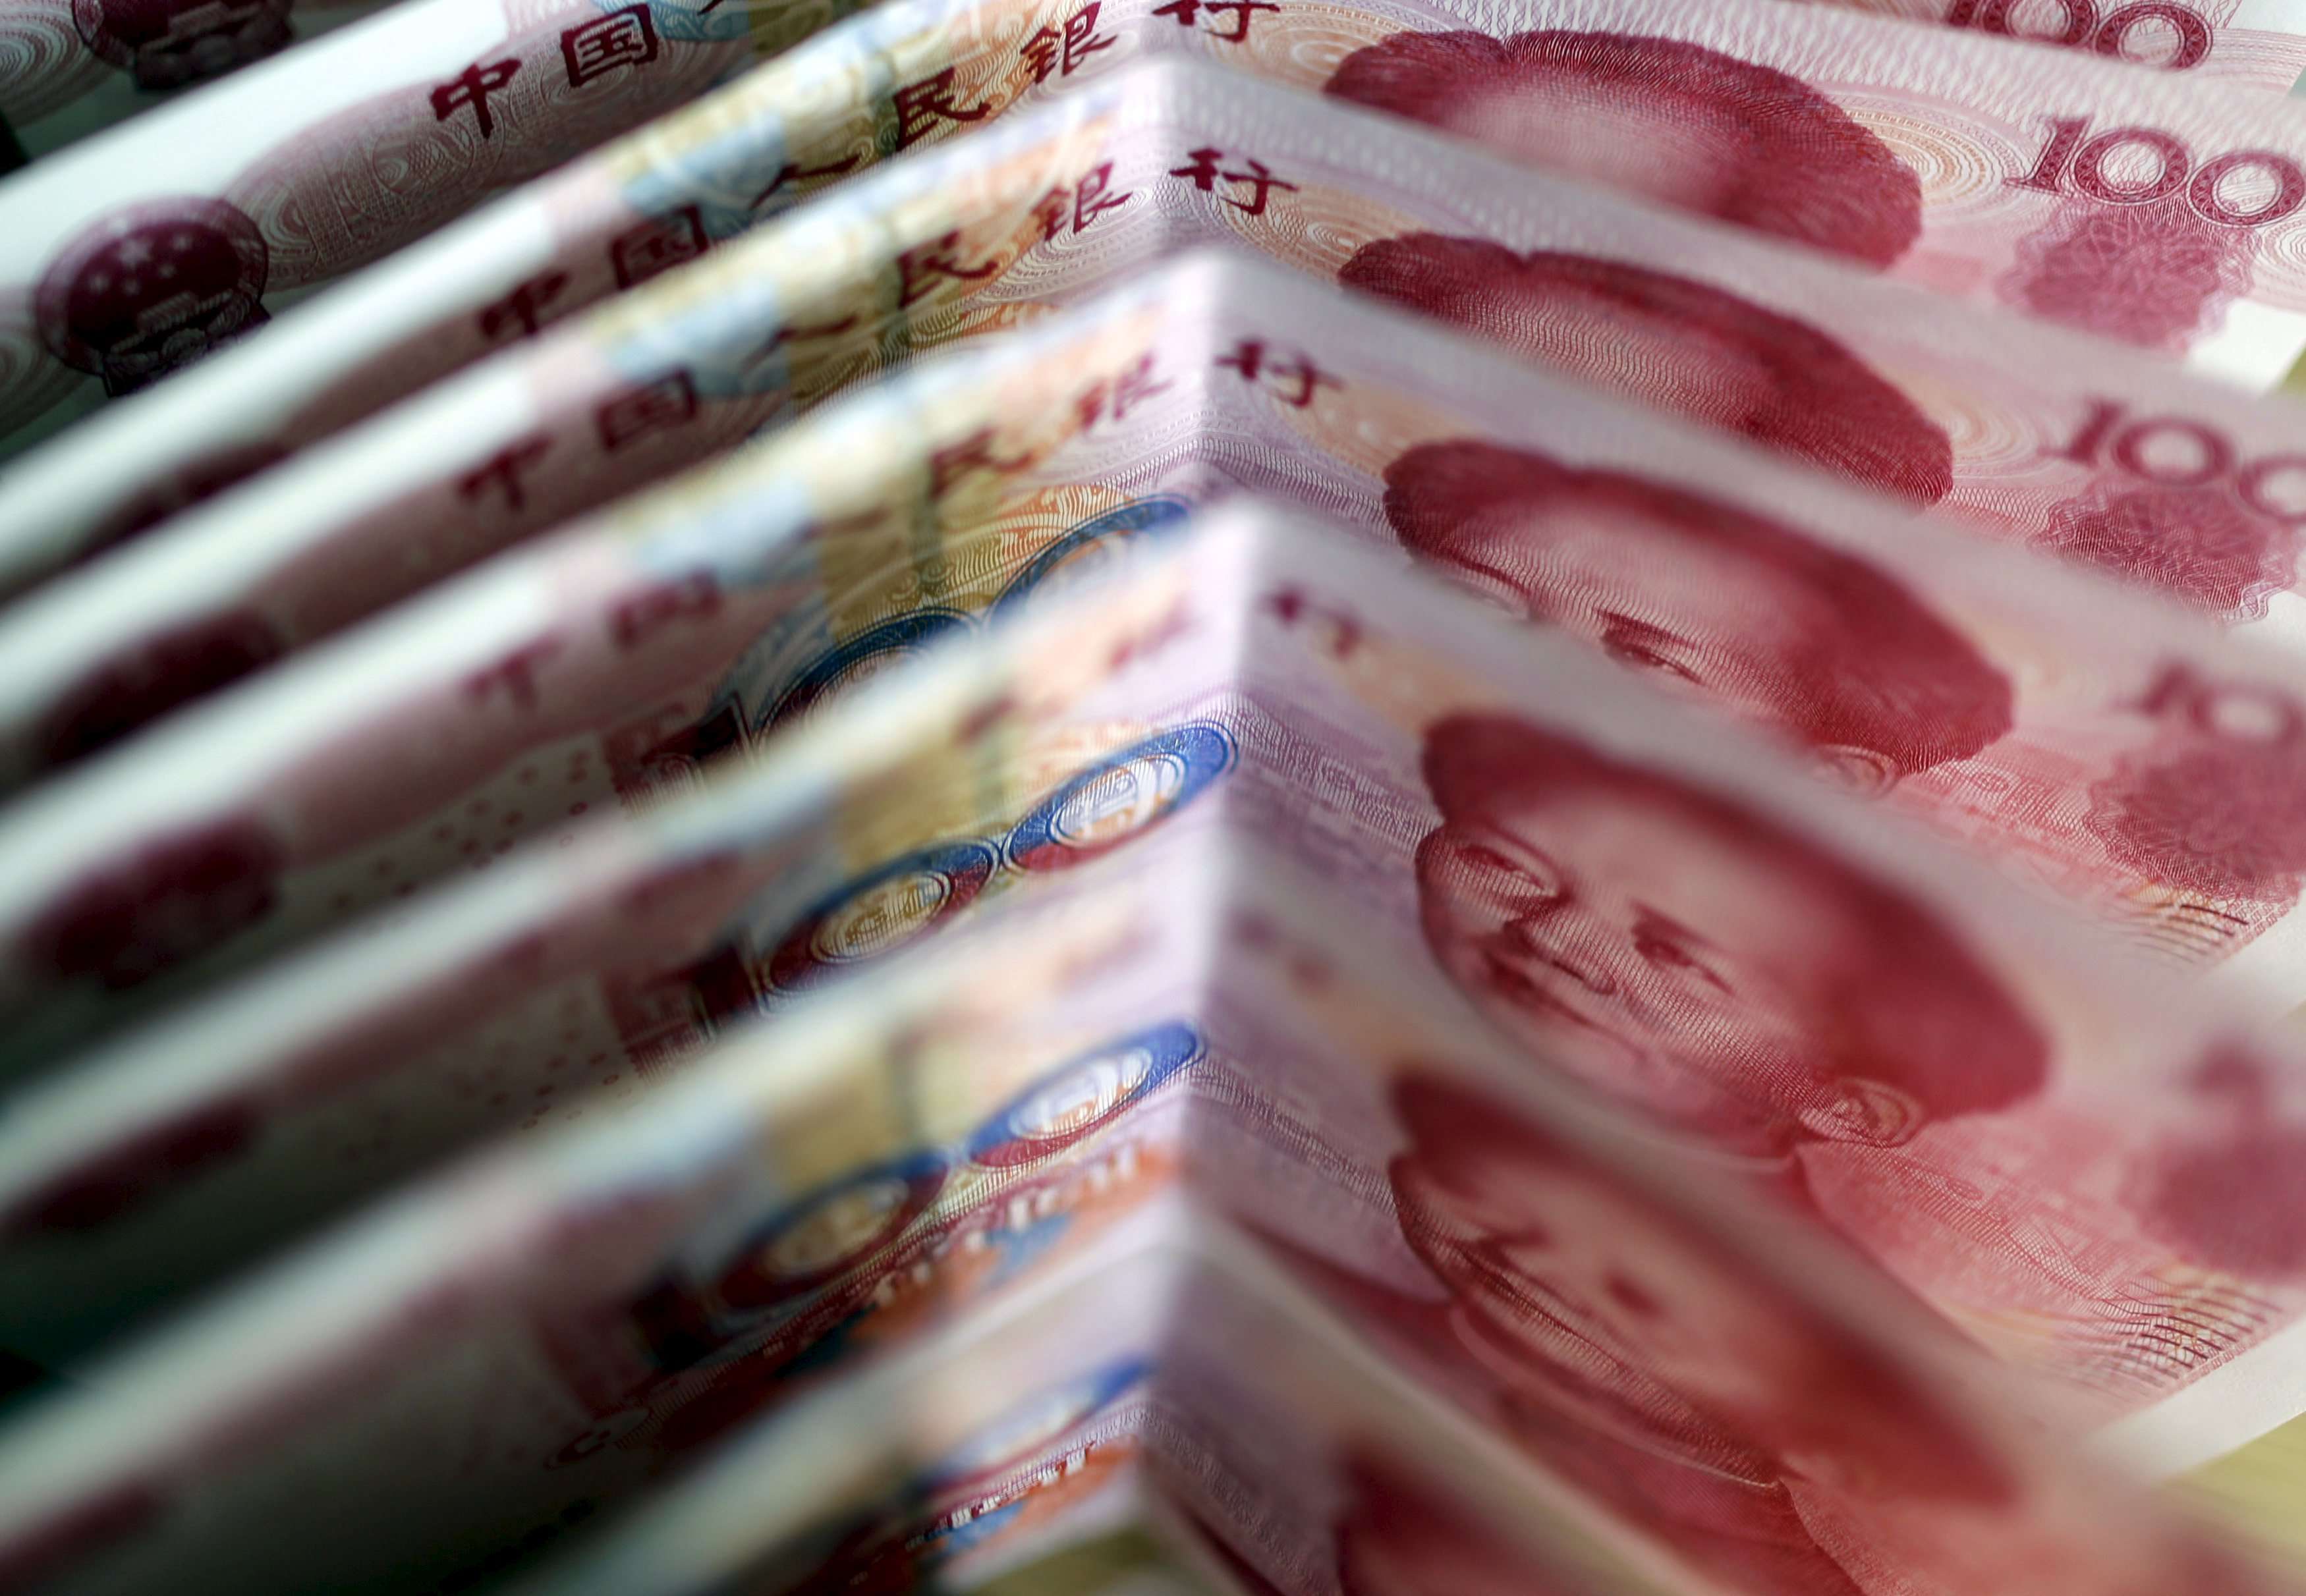 In July 2005 Beijing abolished the yuan’s peg to the US dollar, kicking off the float era. Photo: Reuters